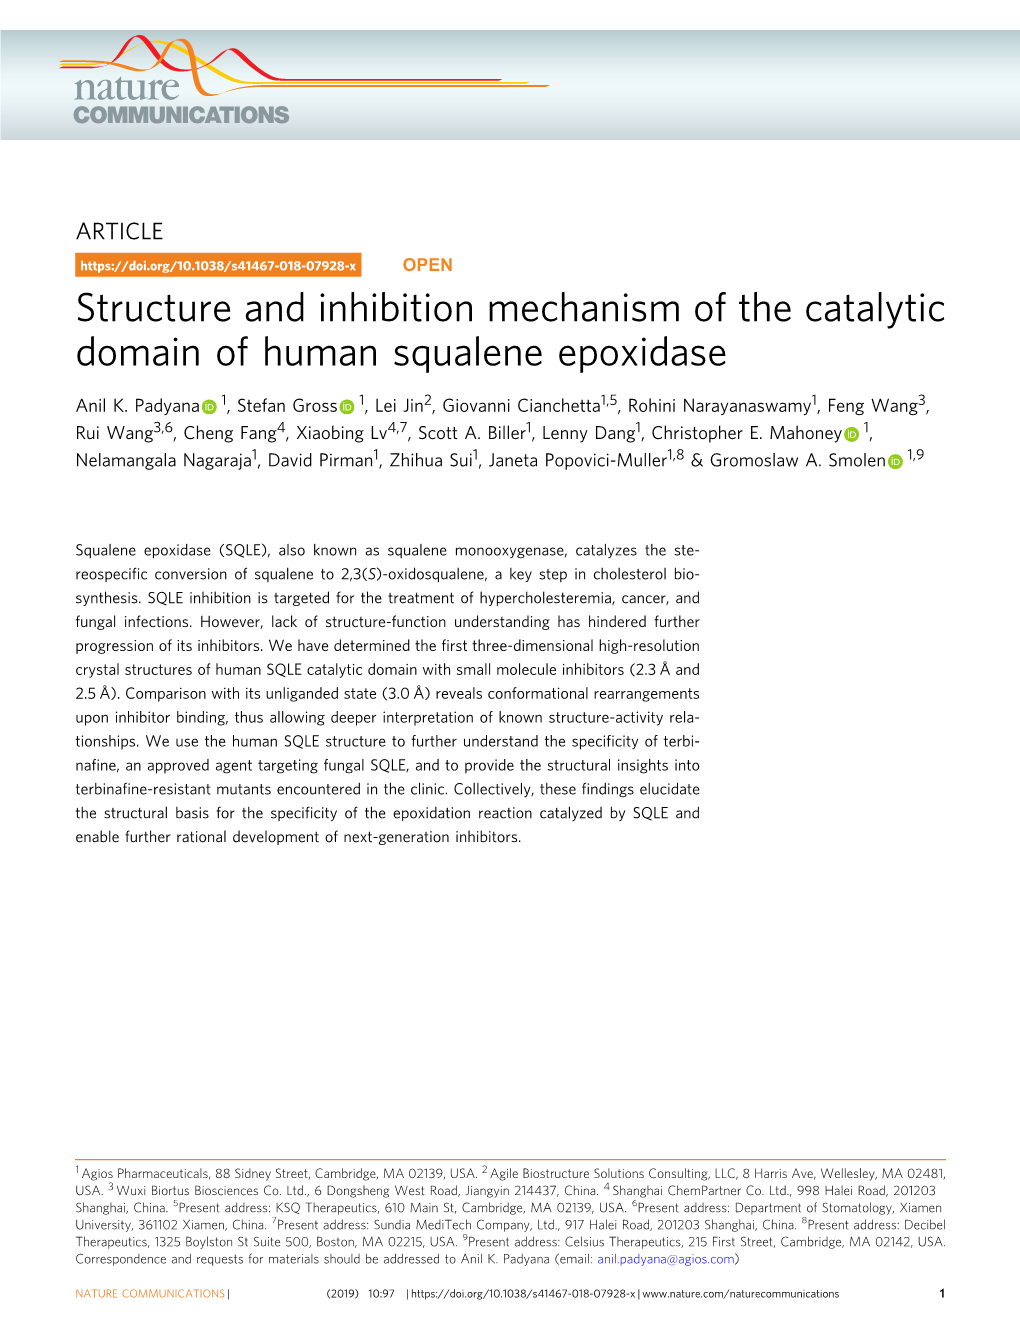 Structure and Inhibition Mechanism of the Catalytic Domain of Human Squalene Epoxidase